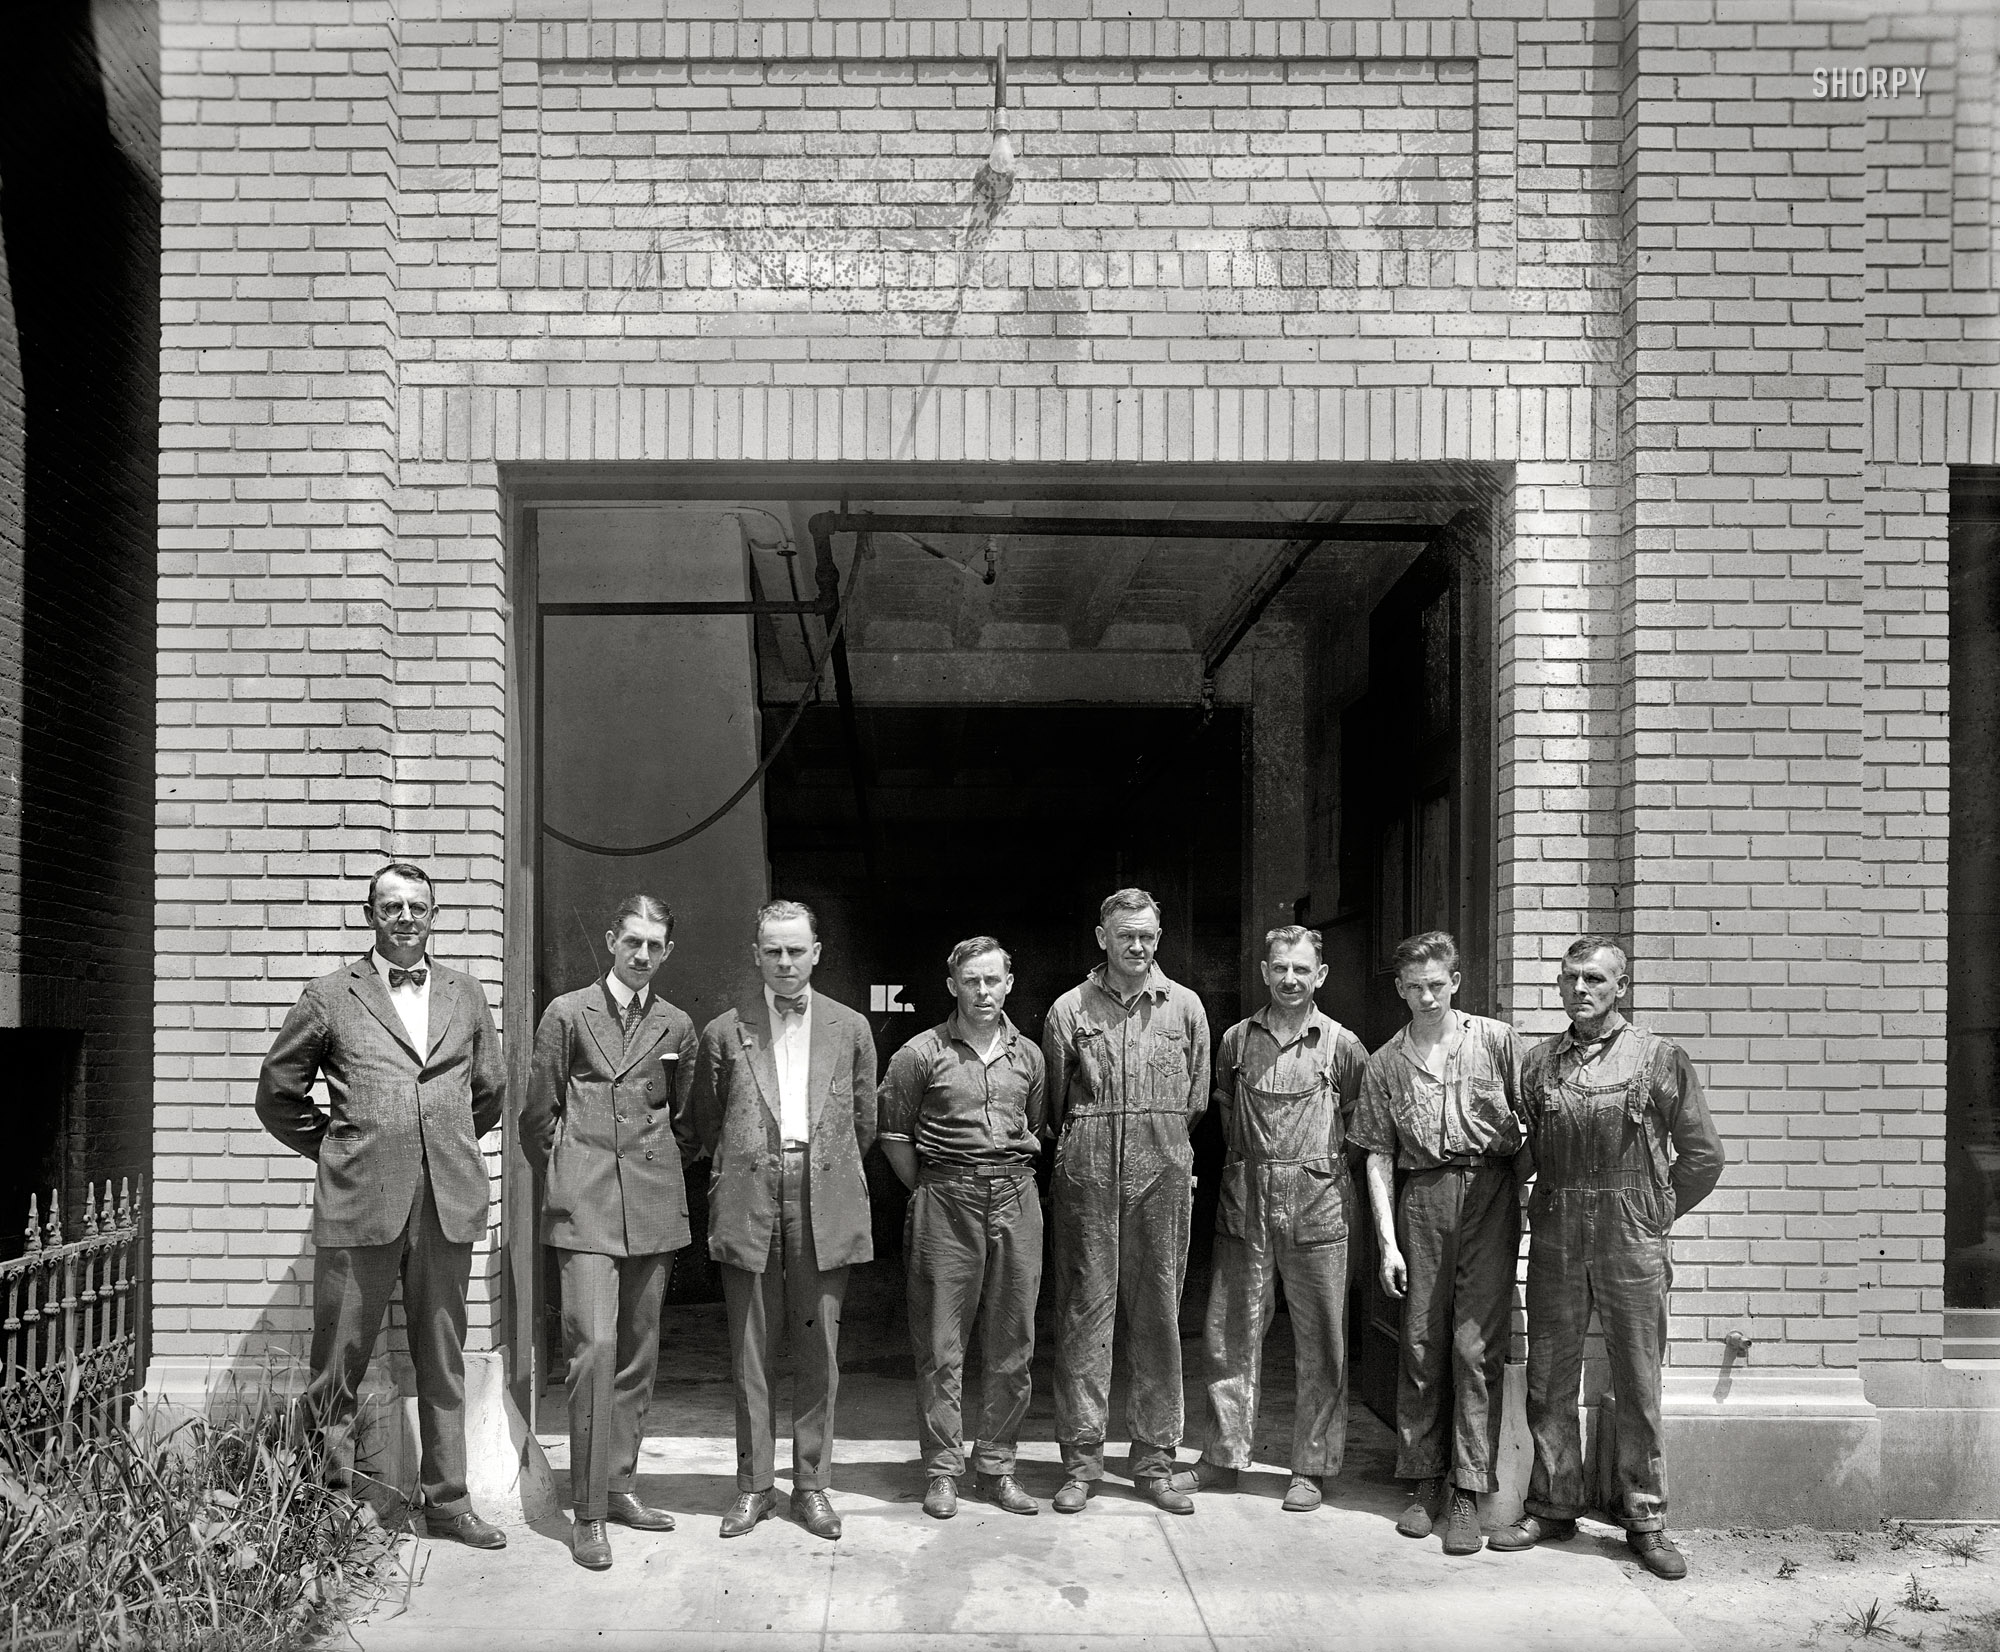 Washington, D.C., circa 1920. "Group, Wayne Smith garage." At this dealer in Haynes automobiles, management and labor pose for posterity. View full size.